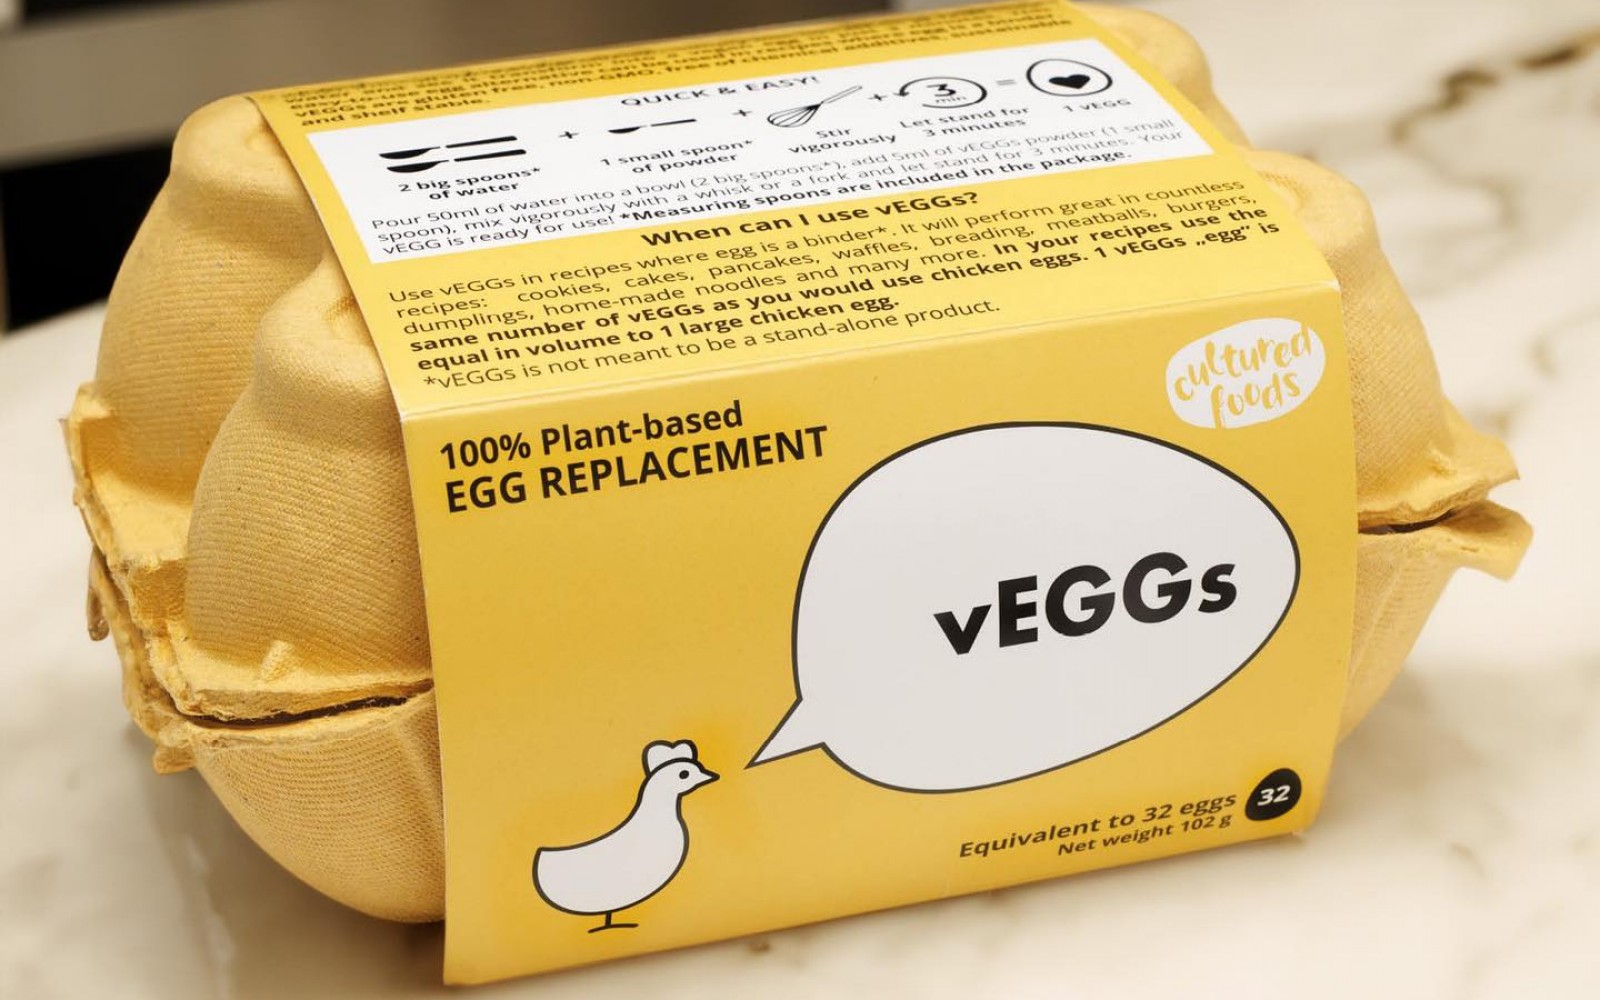 If you are looking for a gluten-free, GMO-free egg substitute, then vEGGs!